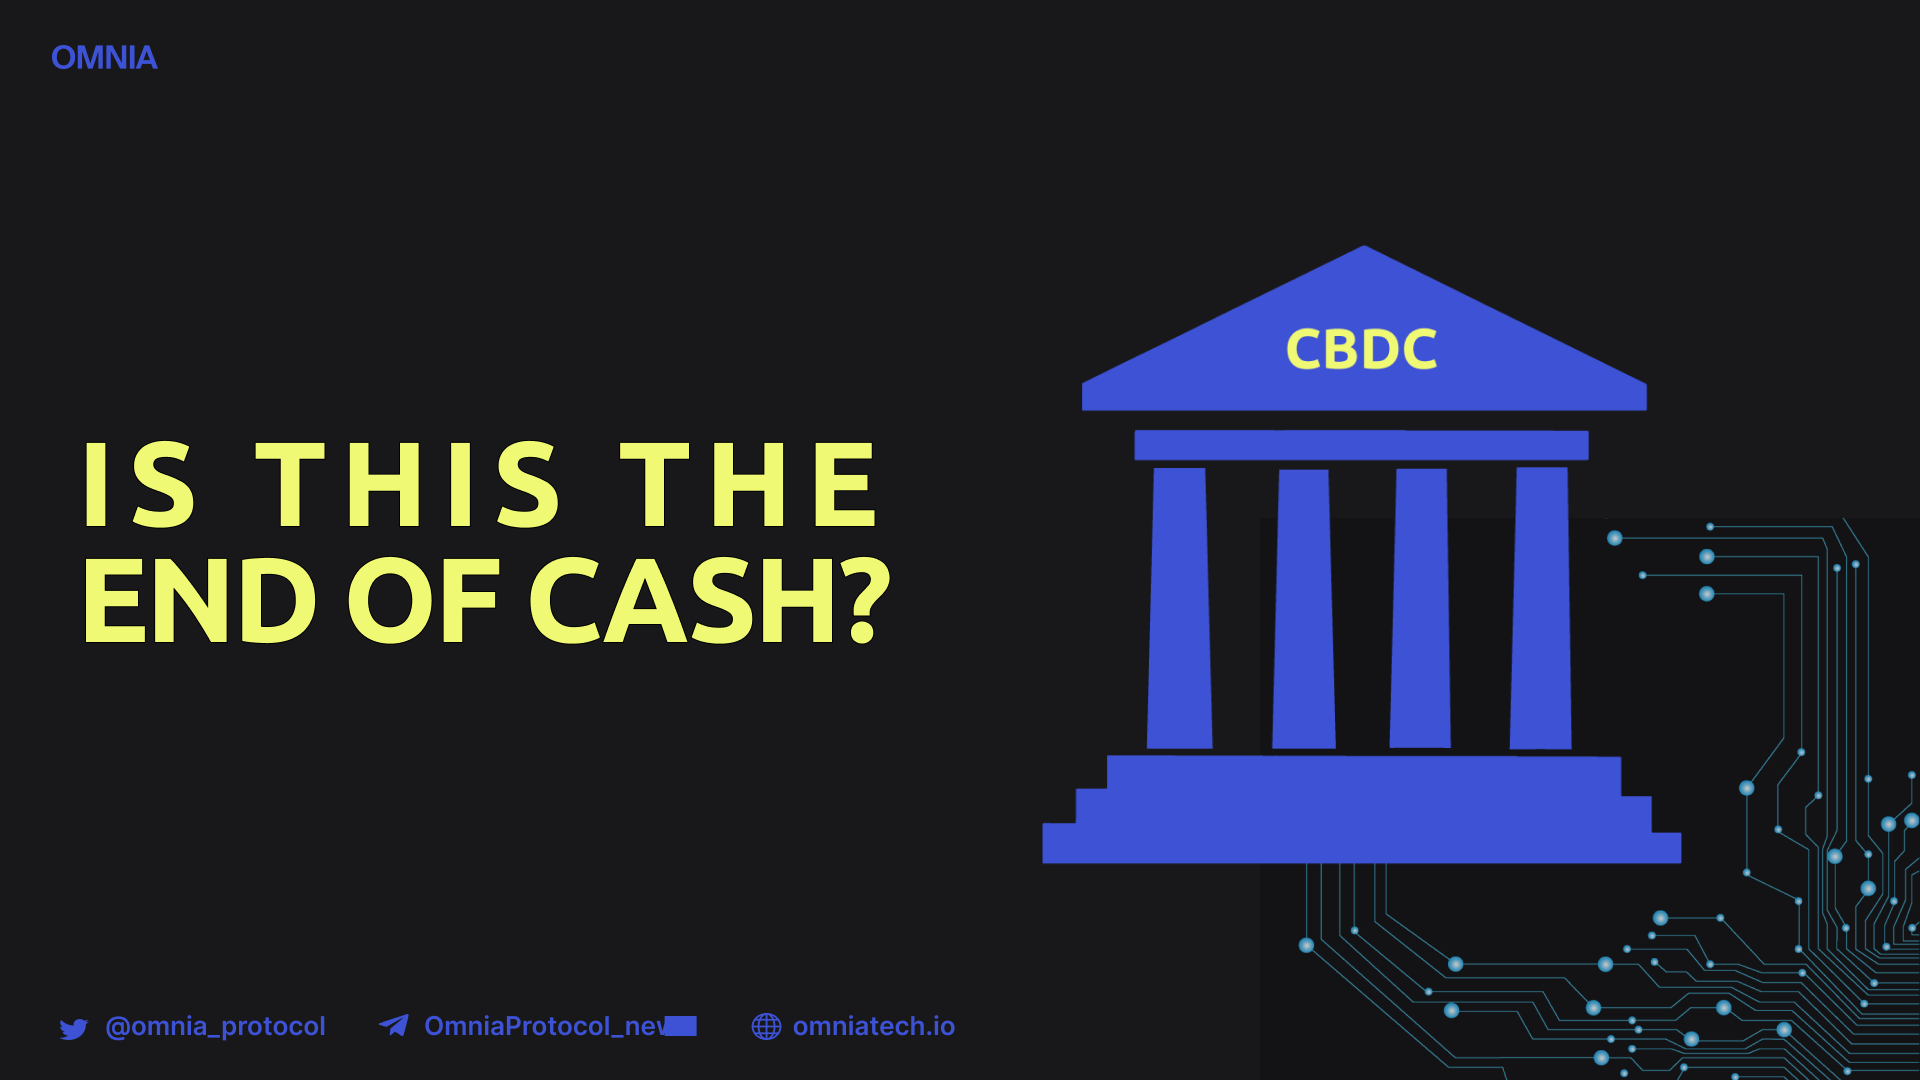 Central Bank Digital Currencies (CBDC) – The End of Cash?